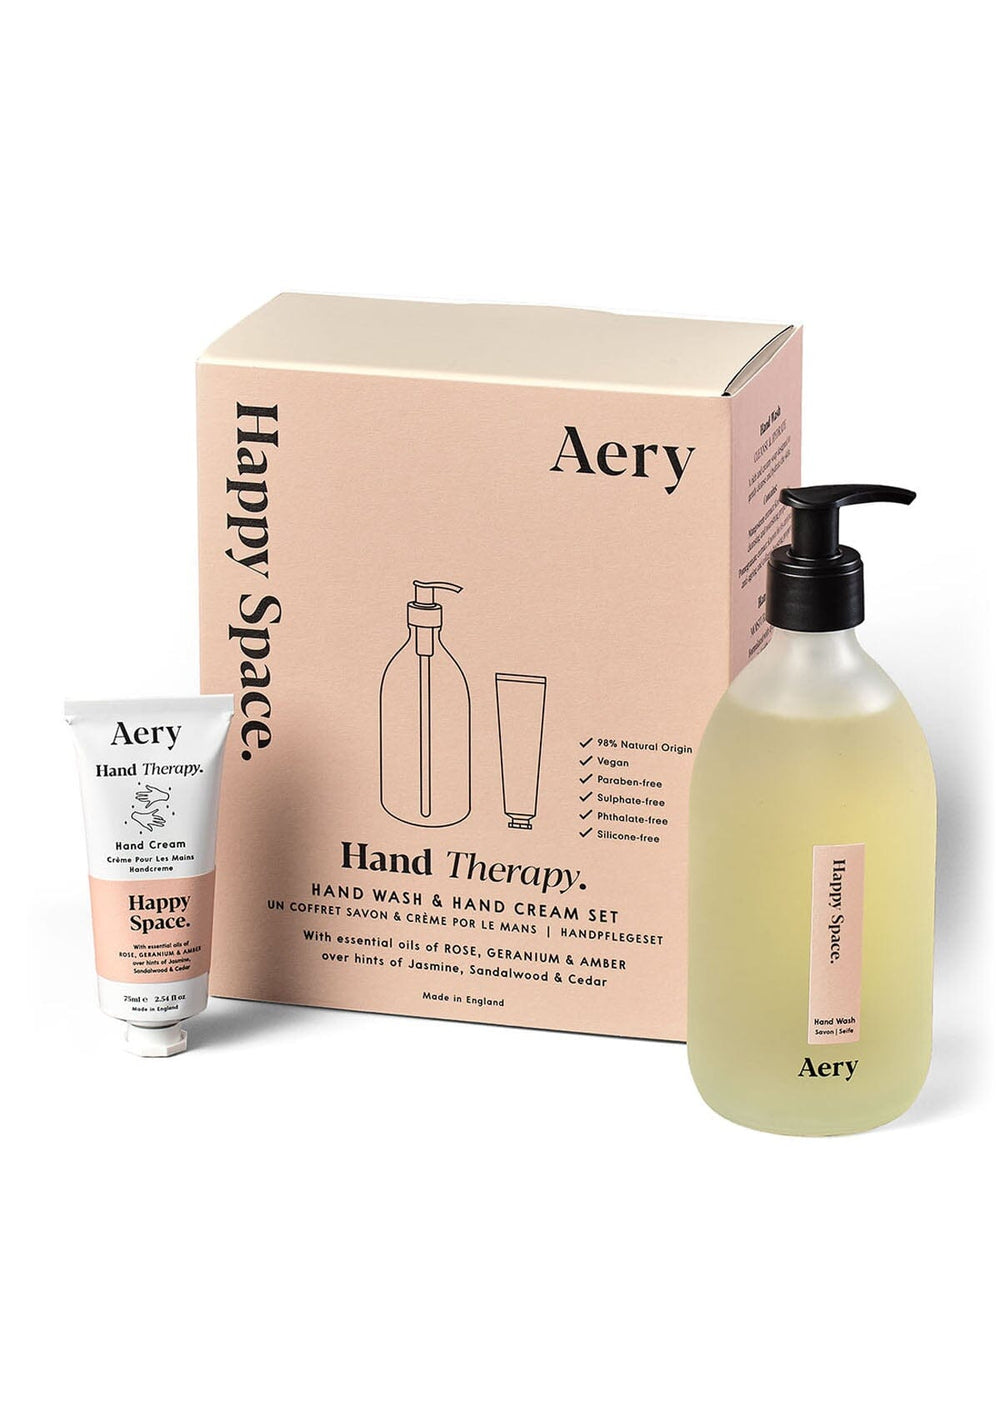 Happy Space (Rose, Geranium & Amber) Hand Therapy Gift Set